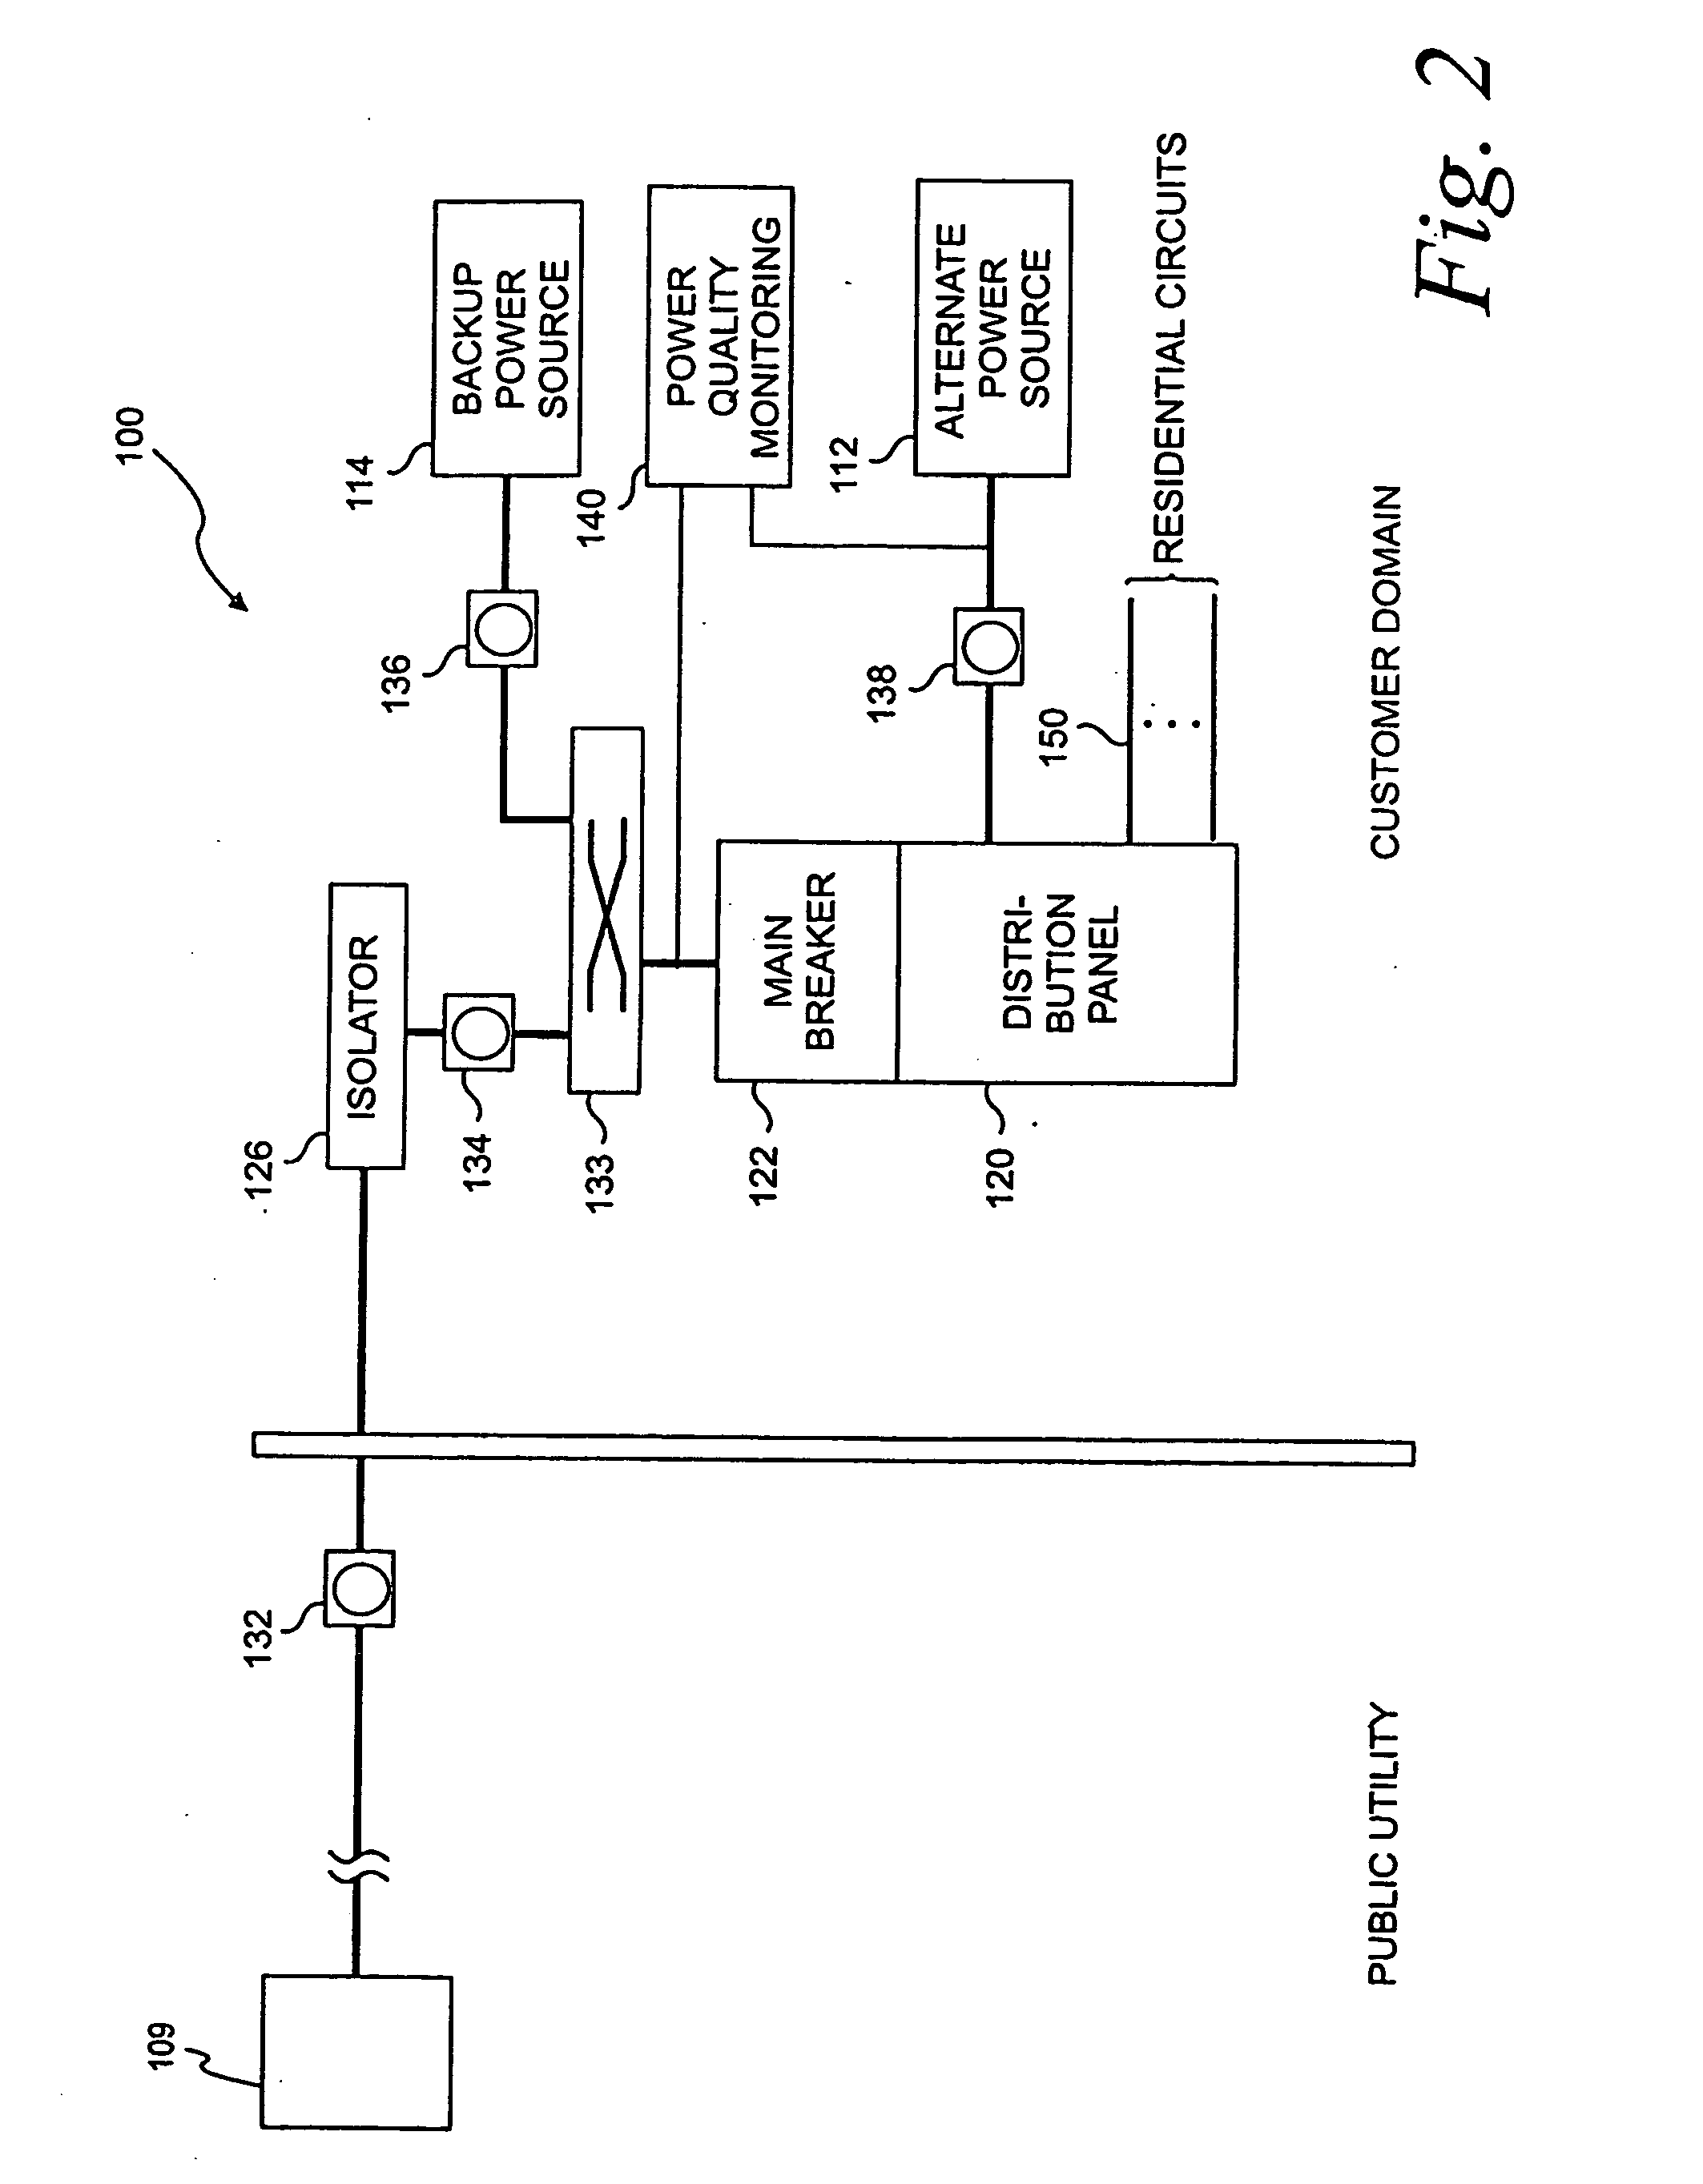 Method of facilitating communications across open circuit breaker contacts